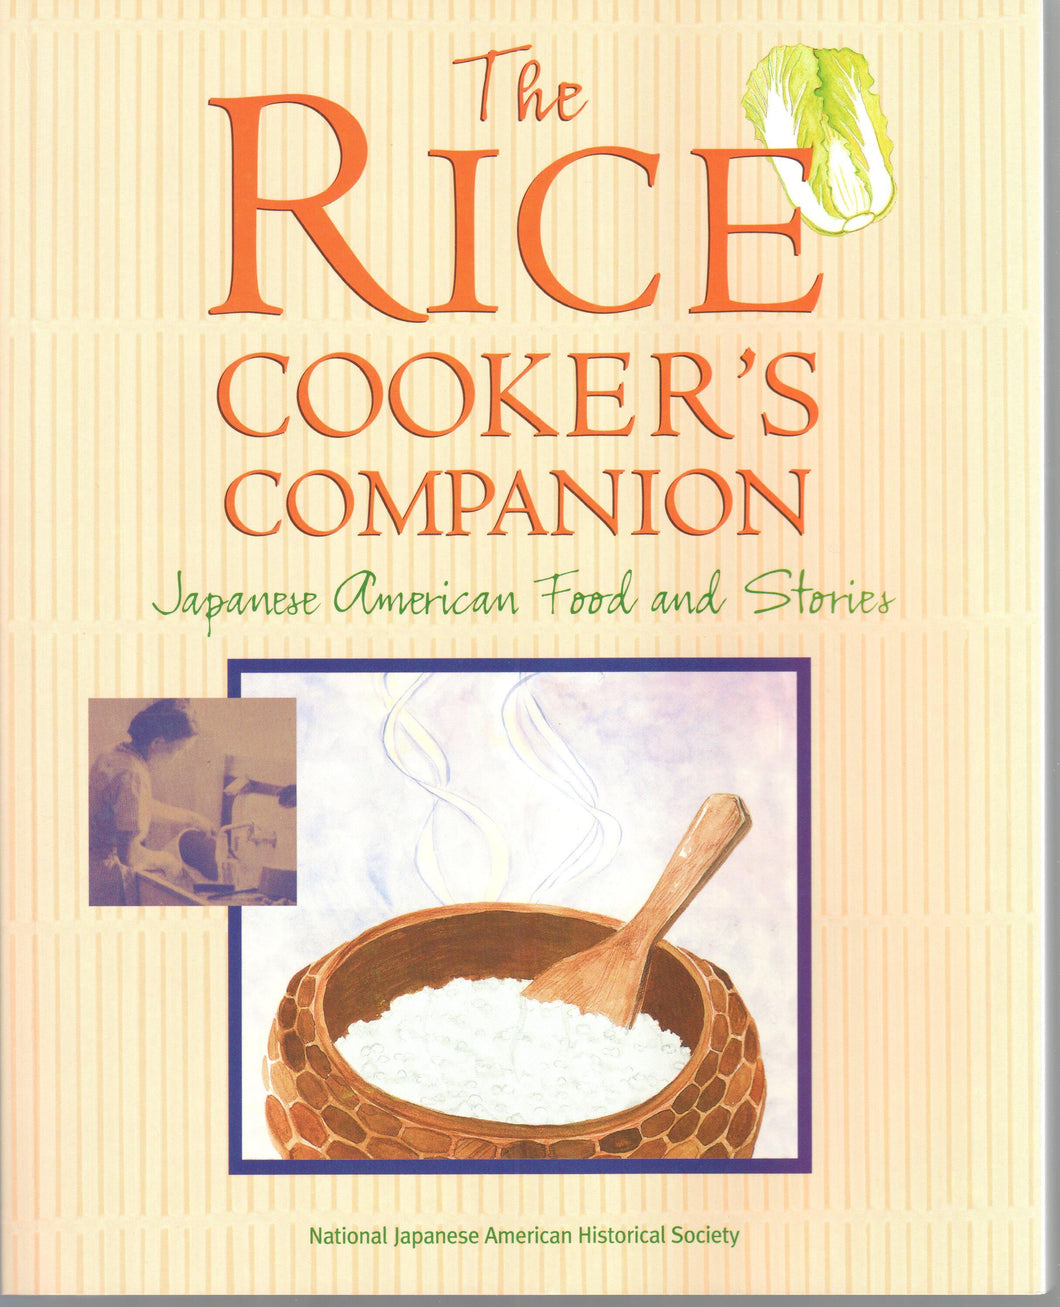 The Rice Cooker's Companion - Japanese American Food and Stories